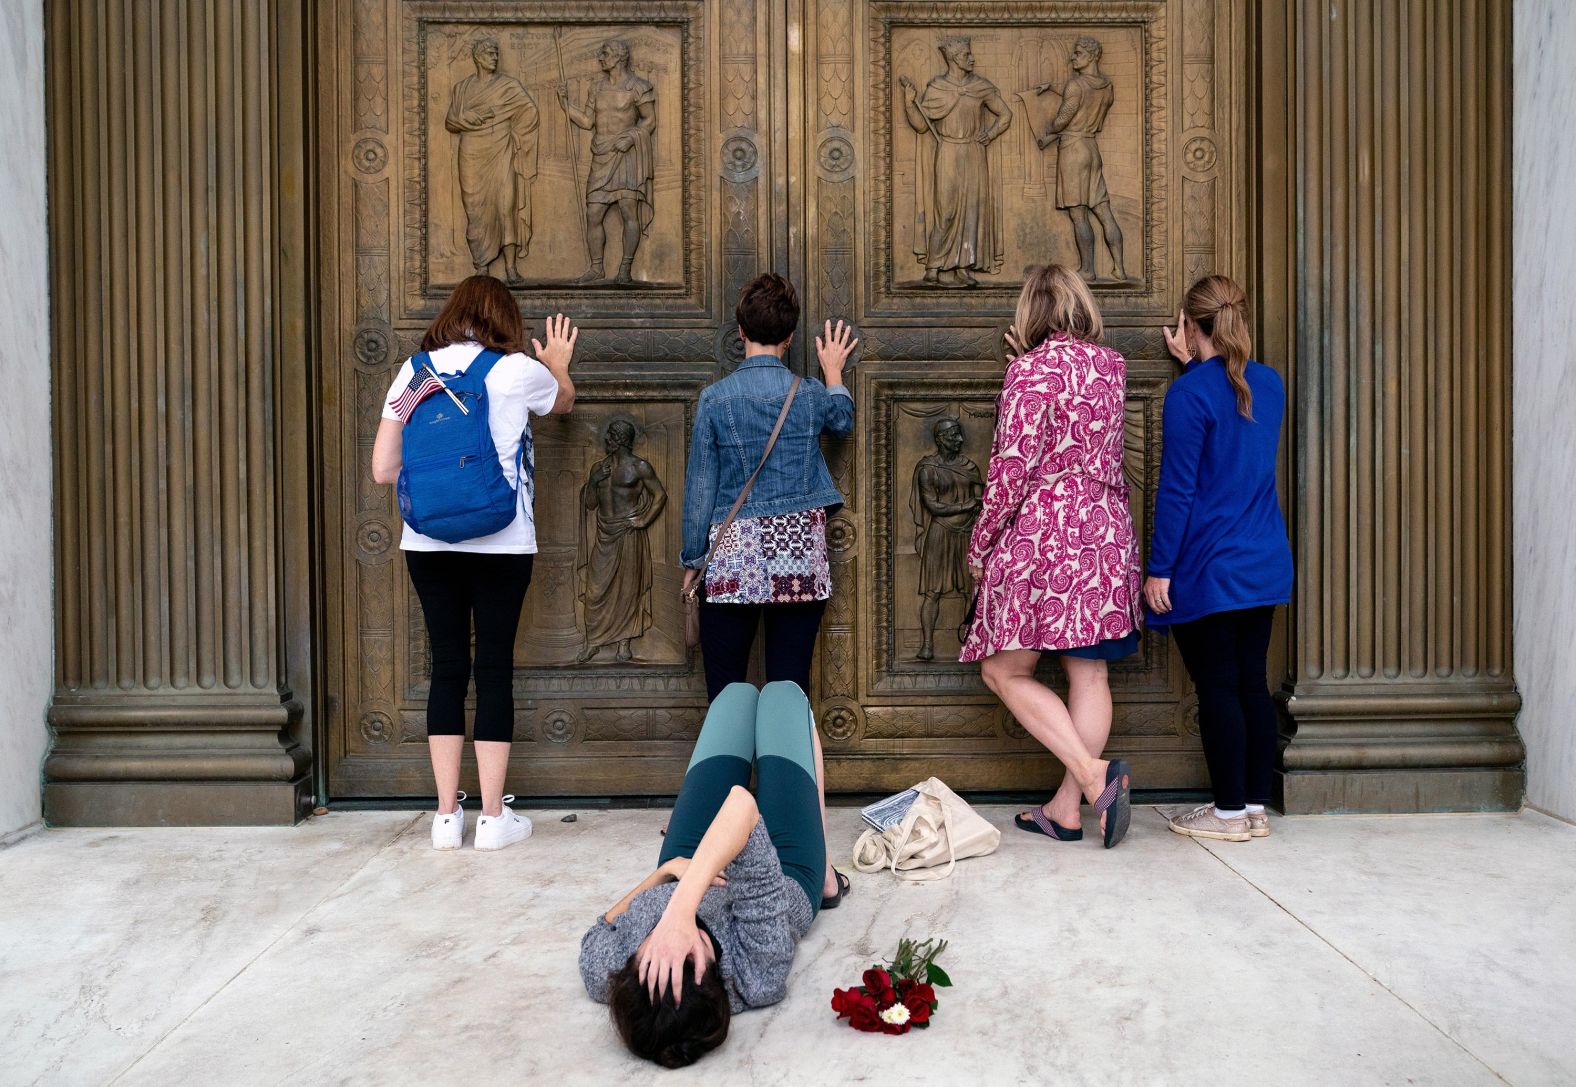 Conservative women who support Barrett's nomination pray while touching the Supreme Court's doors on September 26. Another woman lies on the ground nearby, mourning the death of <a href="index.php?page=&url=https%3A%2F%2Fwww.cnn.com%2F2020%2F09%2F23%2Fpolitics%2Fgallery%2Fruth-bader-ginsburg-memorials%2Findex.html" target="_blank">Justice Ruth Bader Ginsburg.</a>